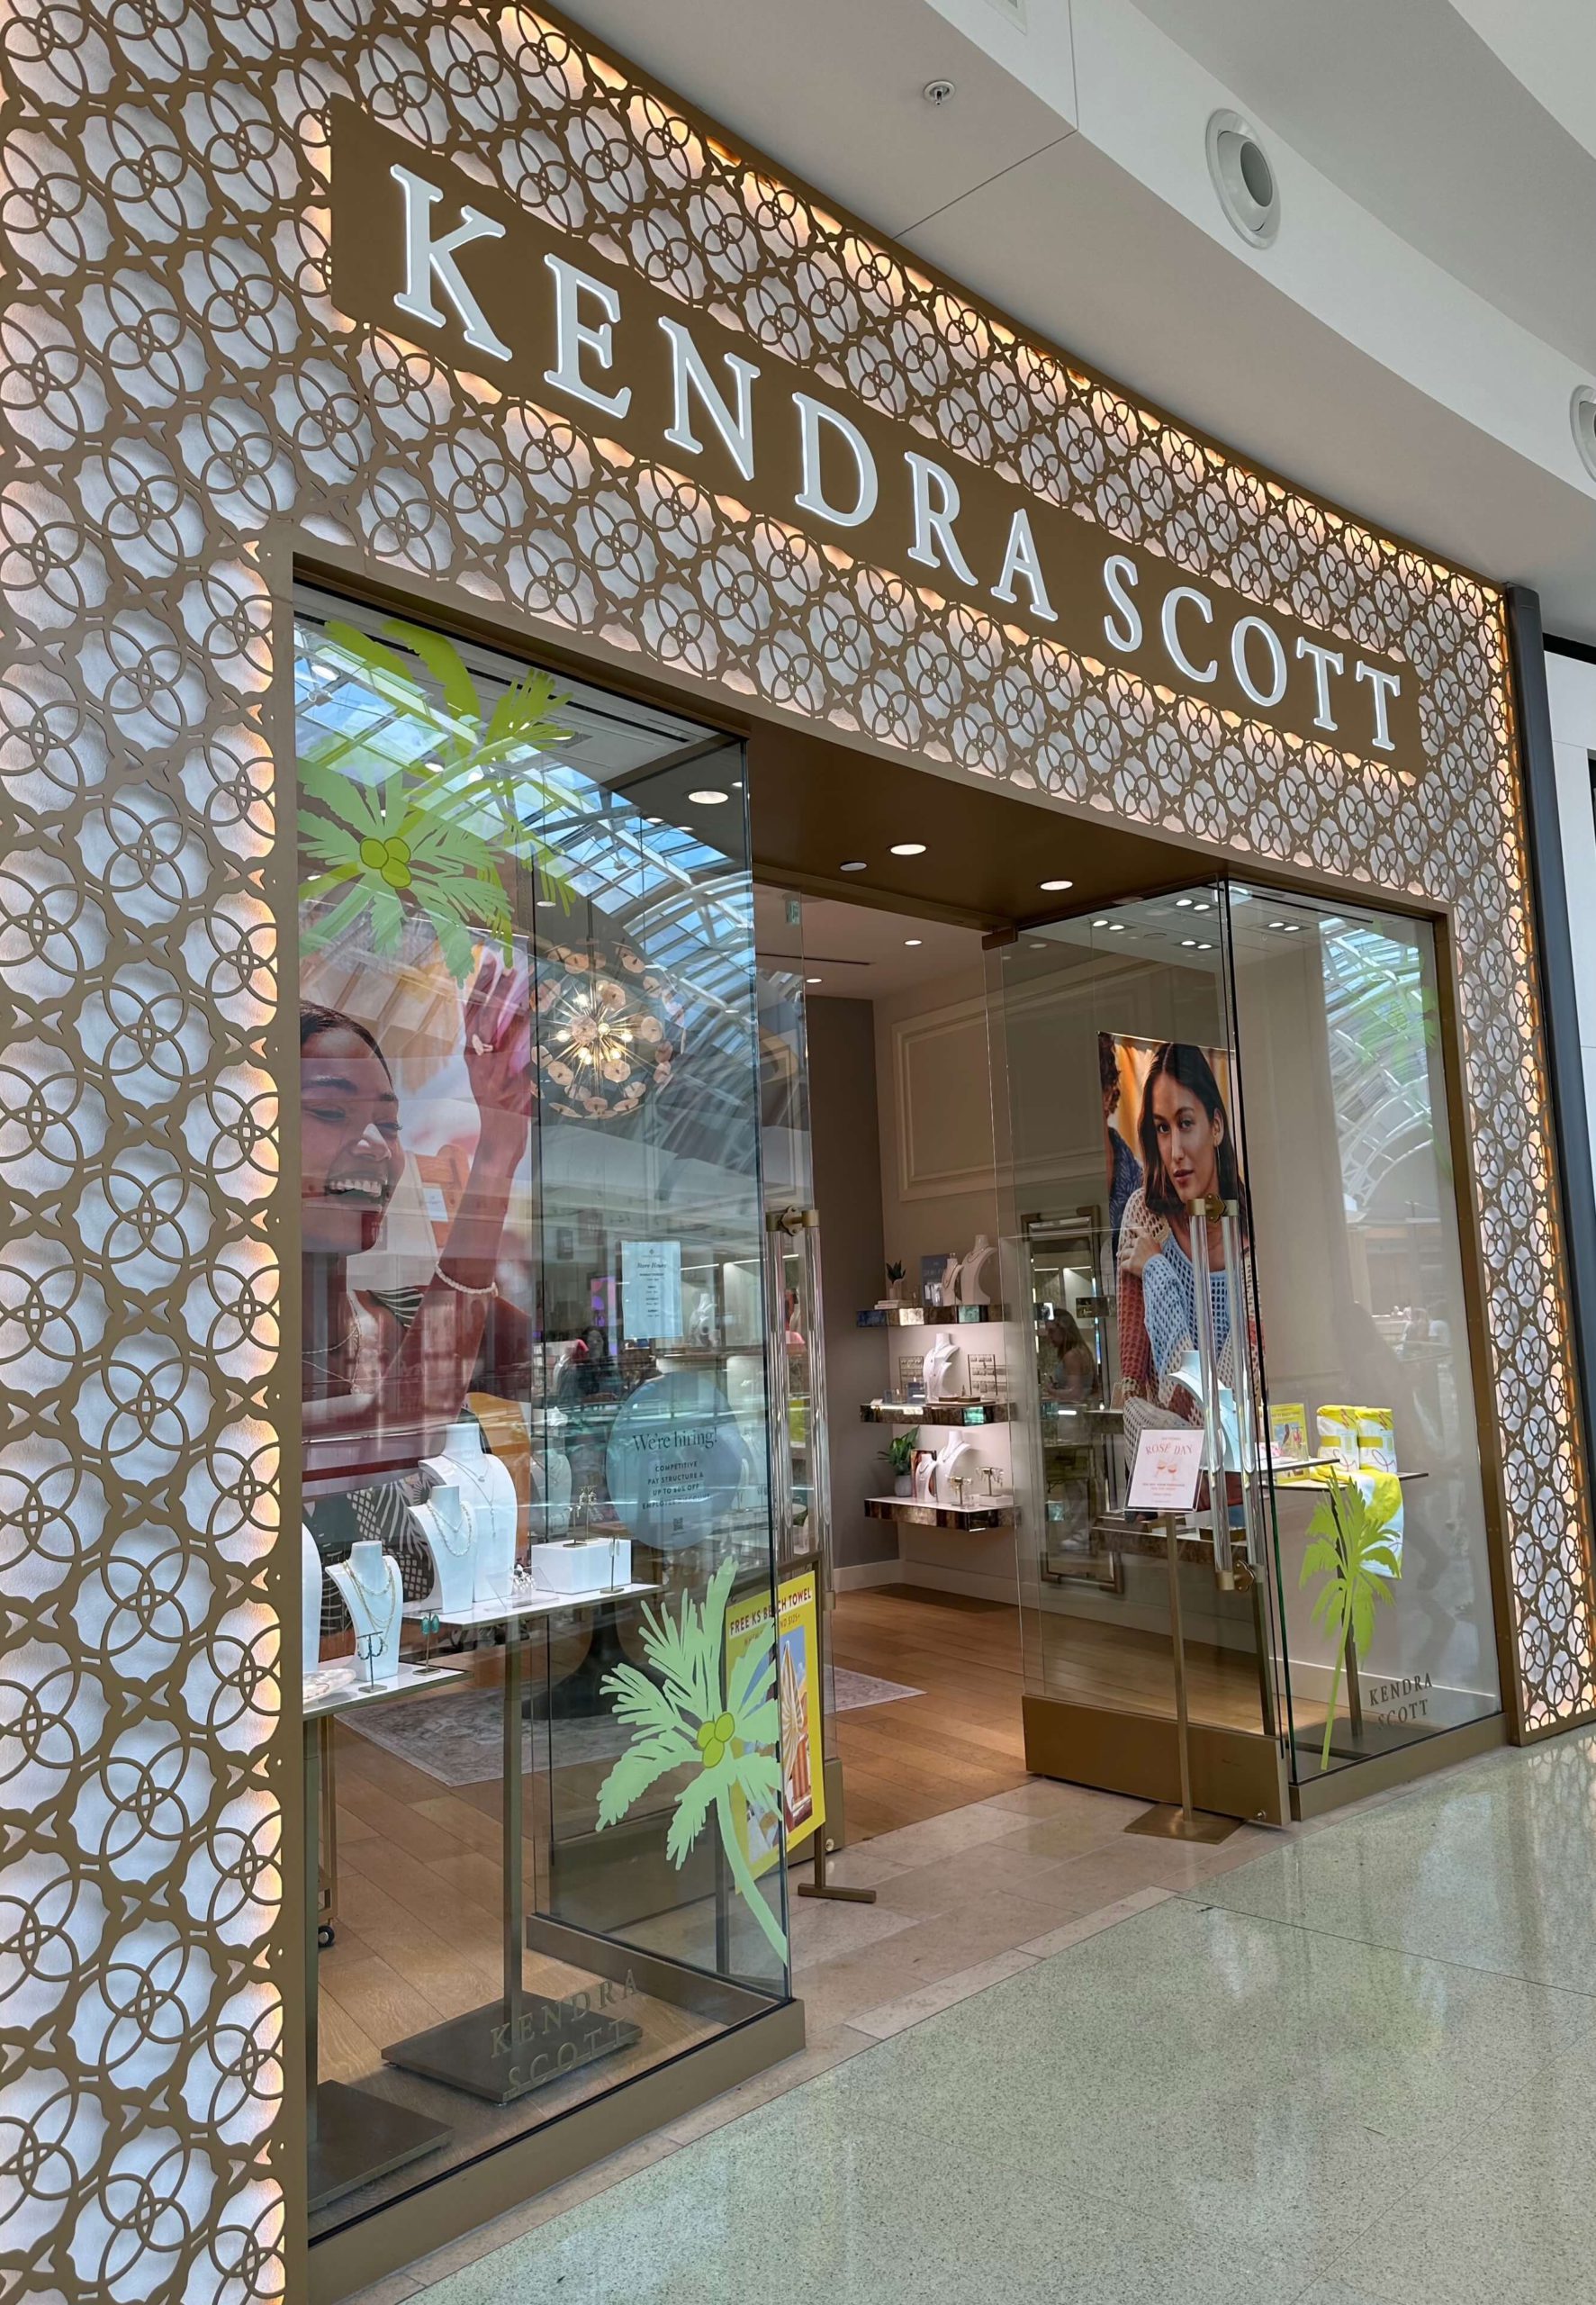 Kendra Scott at the Mall at Millenia in Orlando Florida